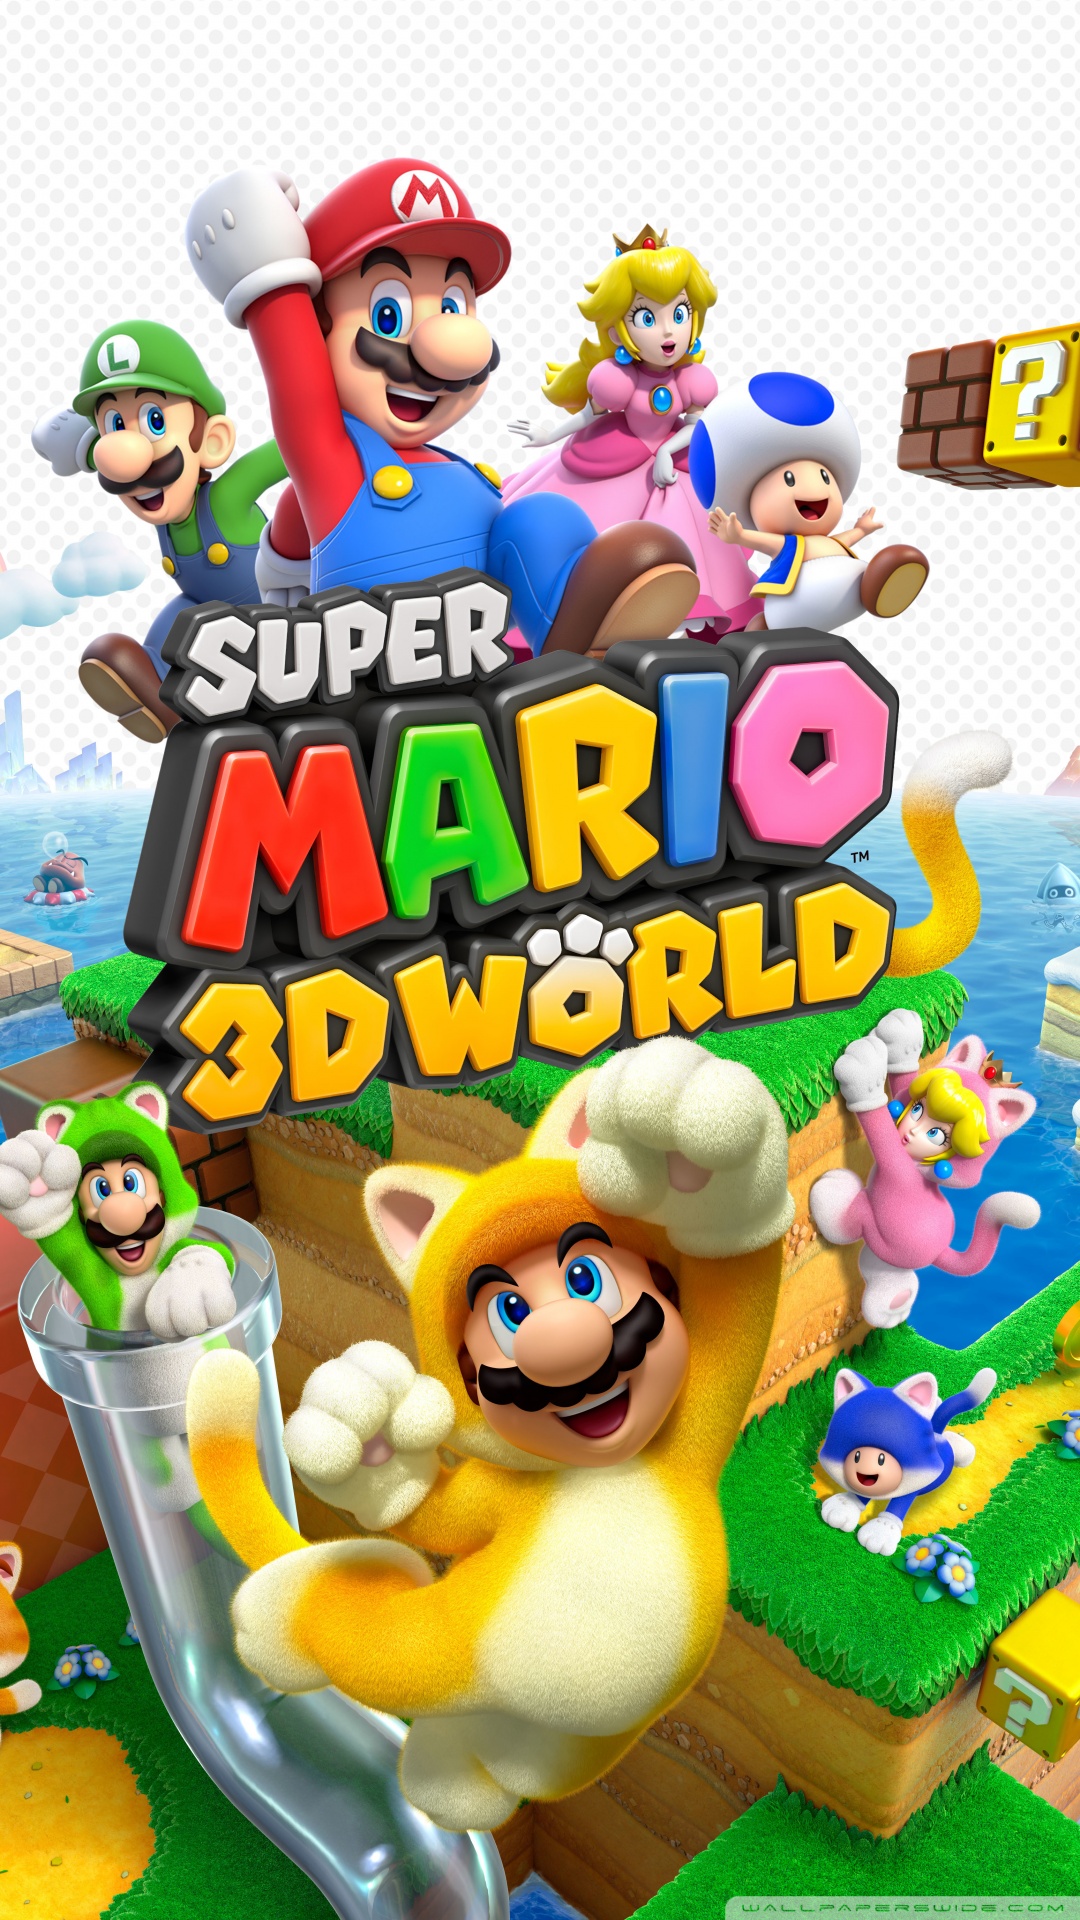 Download 21 super-mario-3d-world-wallpapers ForumNew-Wallpaper-Choice-MarioWiki-FANDOM-powered-by-Wikia.jpg